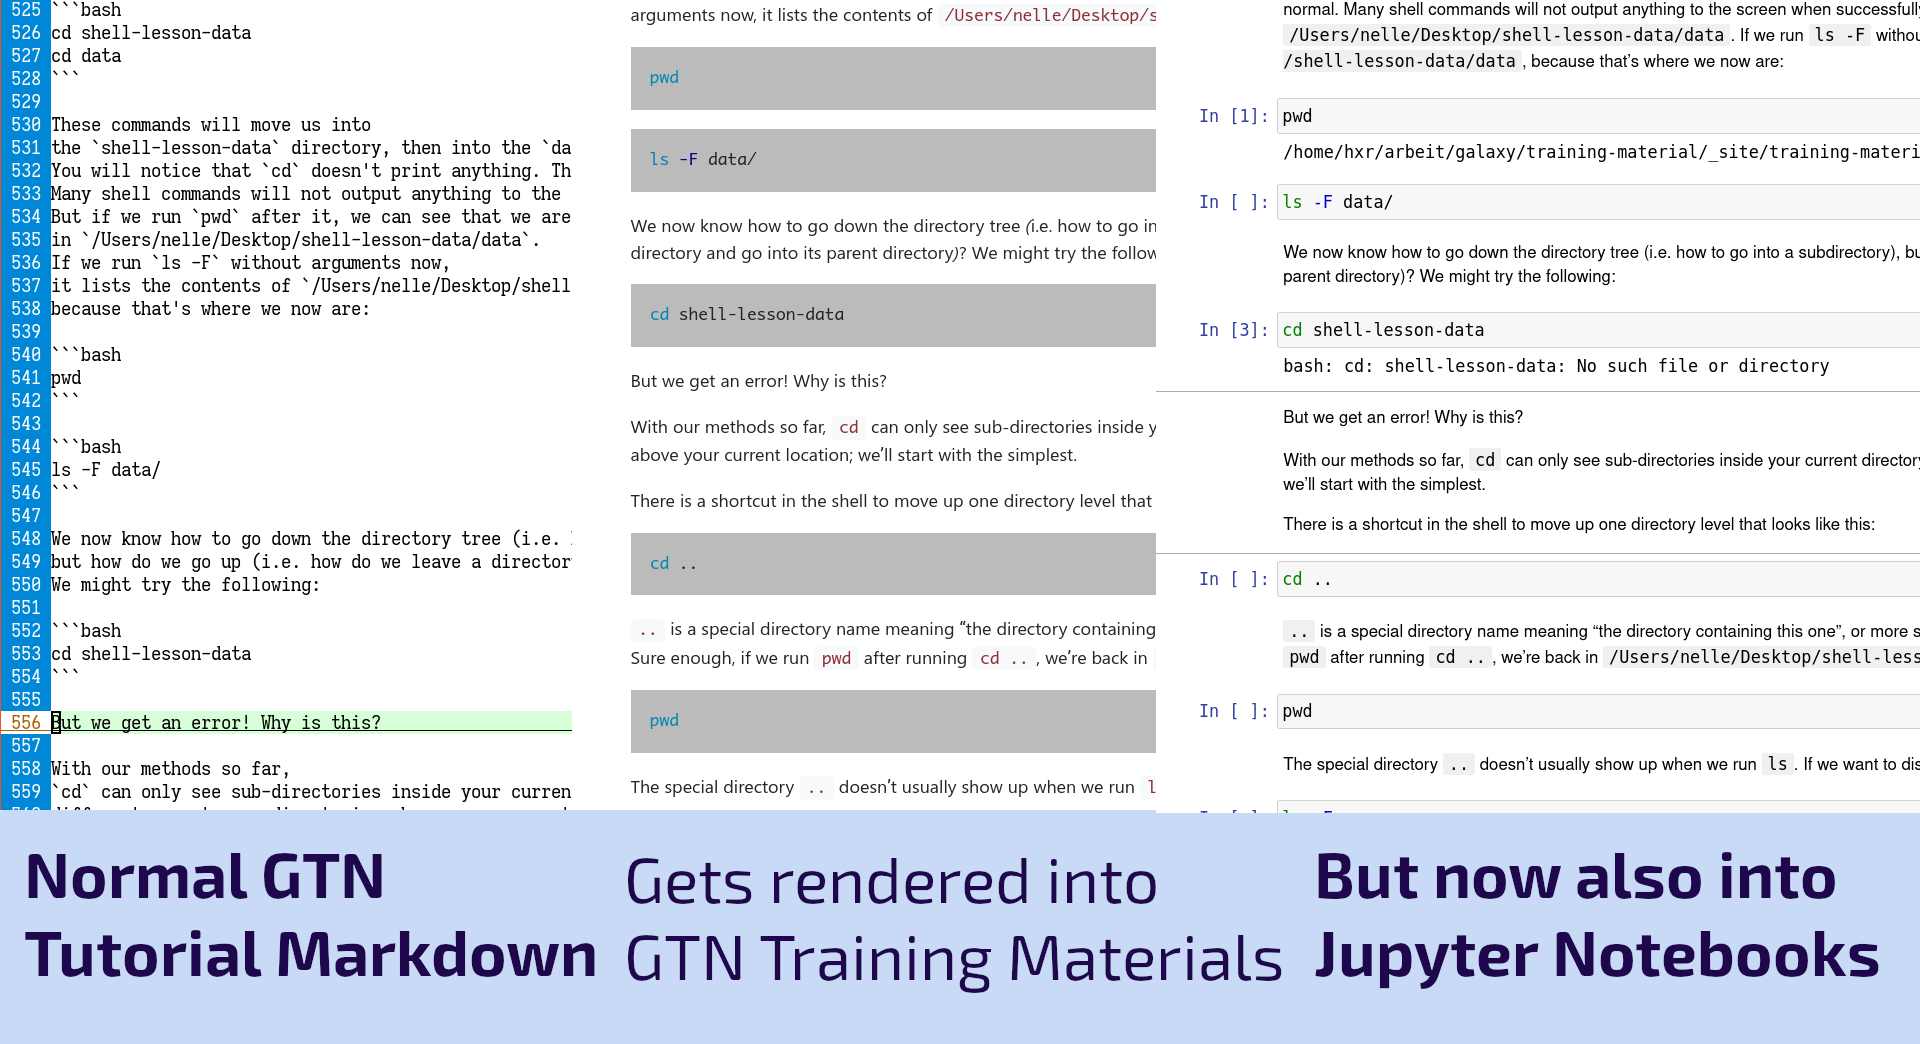 Image comparing Markdown, GTN materials, and new Jupyter Notebook output